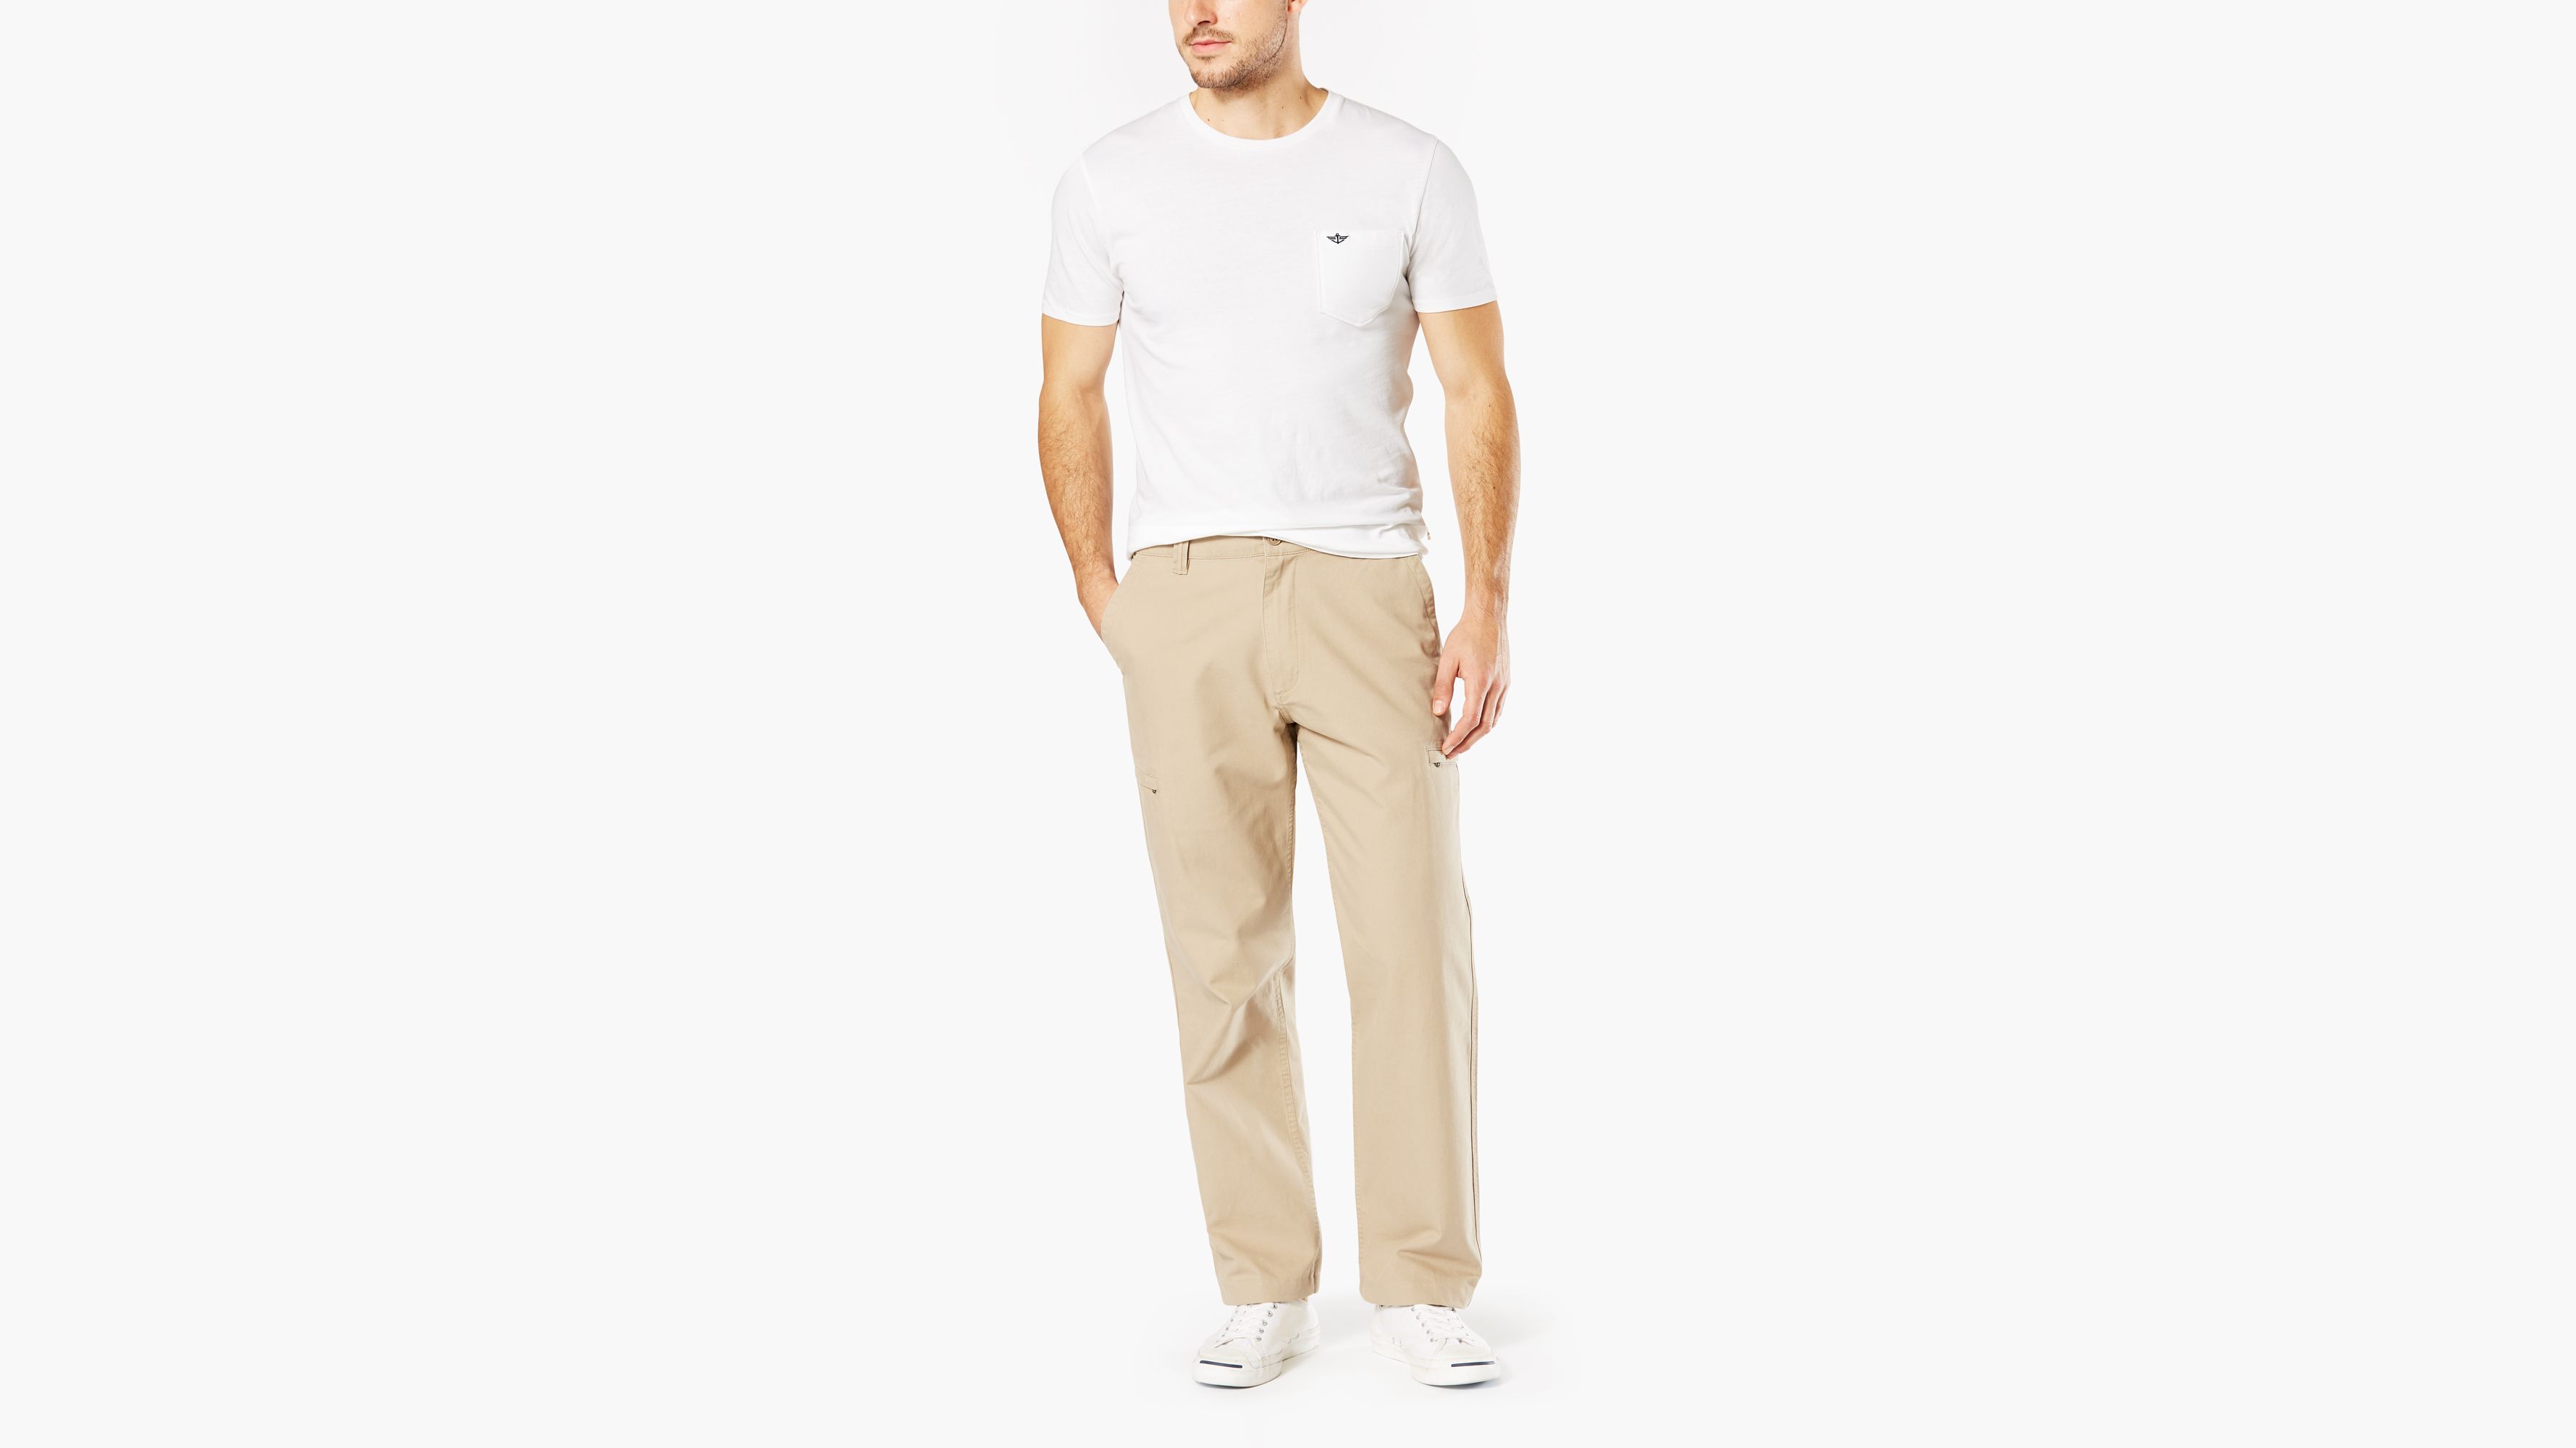 mens big and tall cargo pants